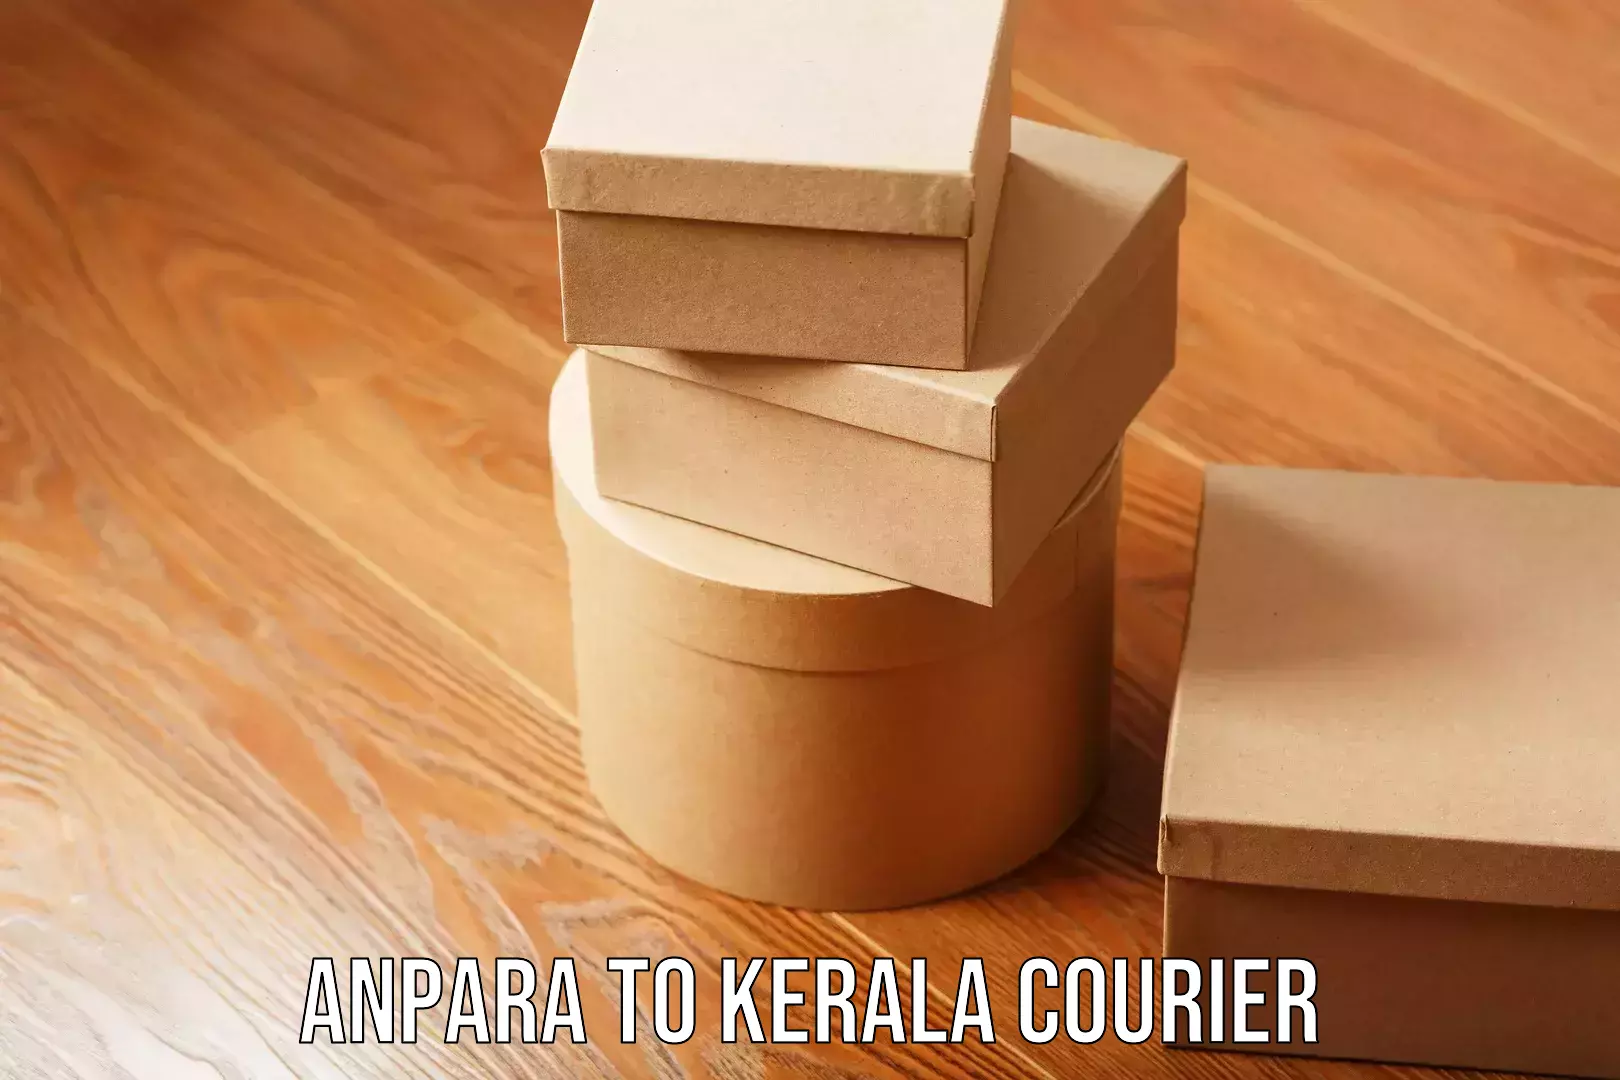 Next-day delivery options Anpara to Kerala